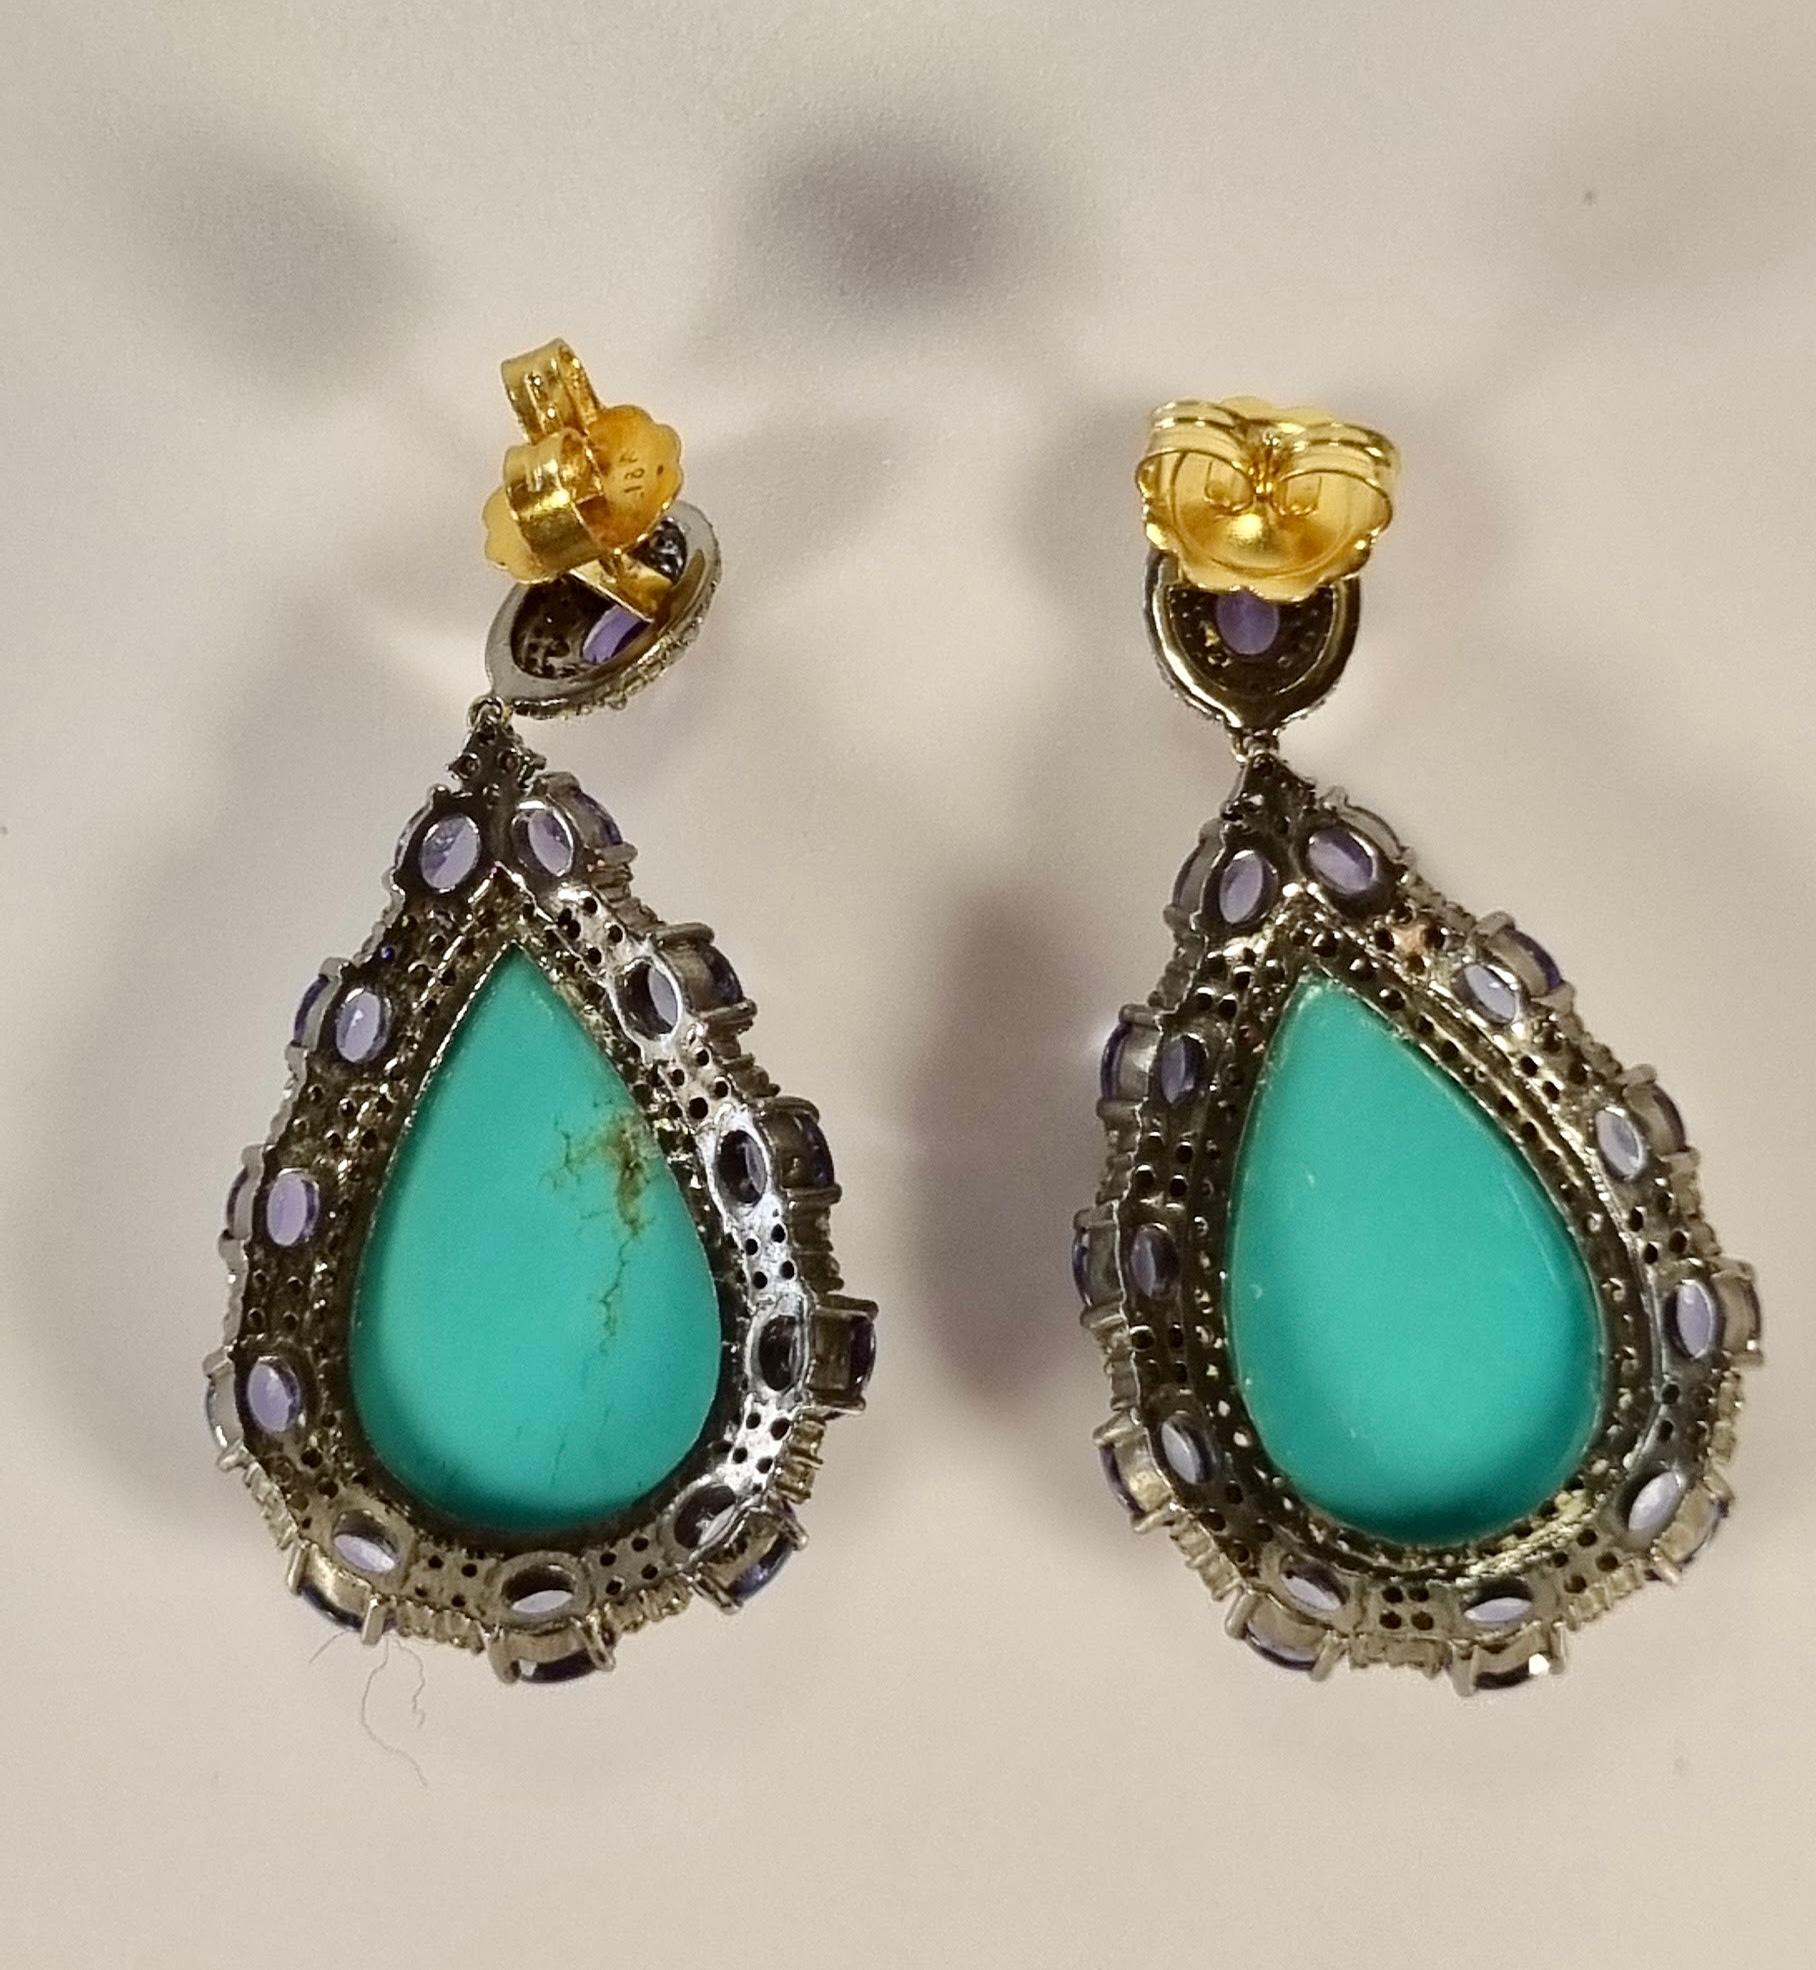 Brilliant Cut Turquoise, Tsavorites, Diamonds and Gold and Silver Chandelier Earring For Sale